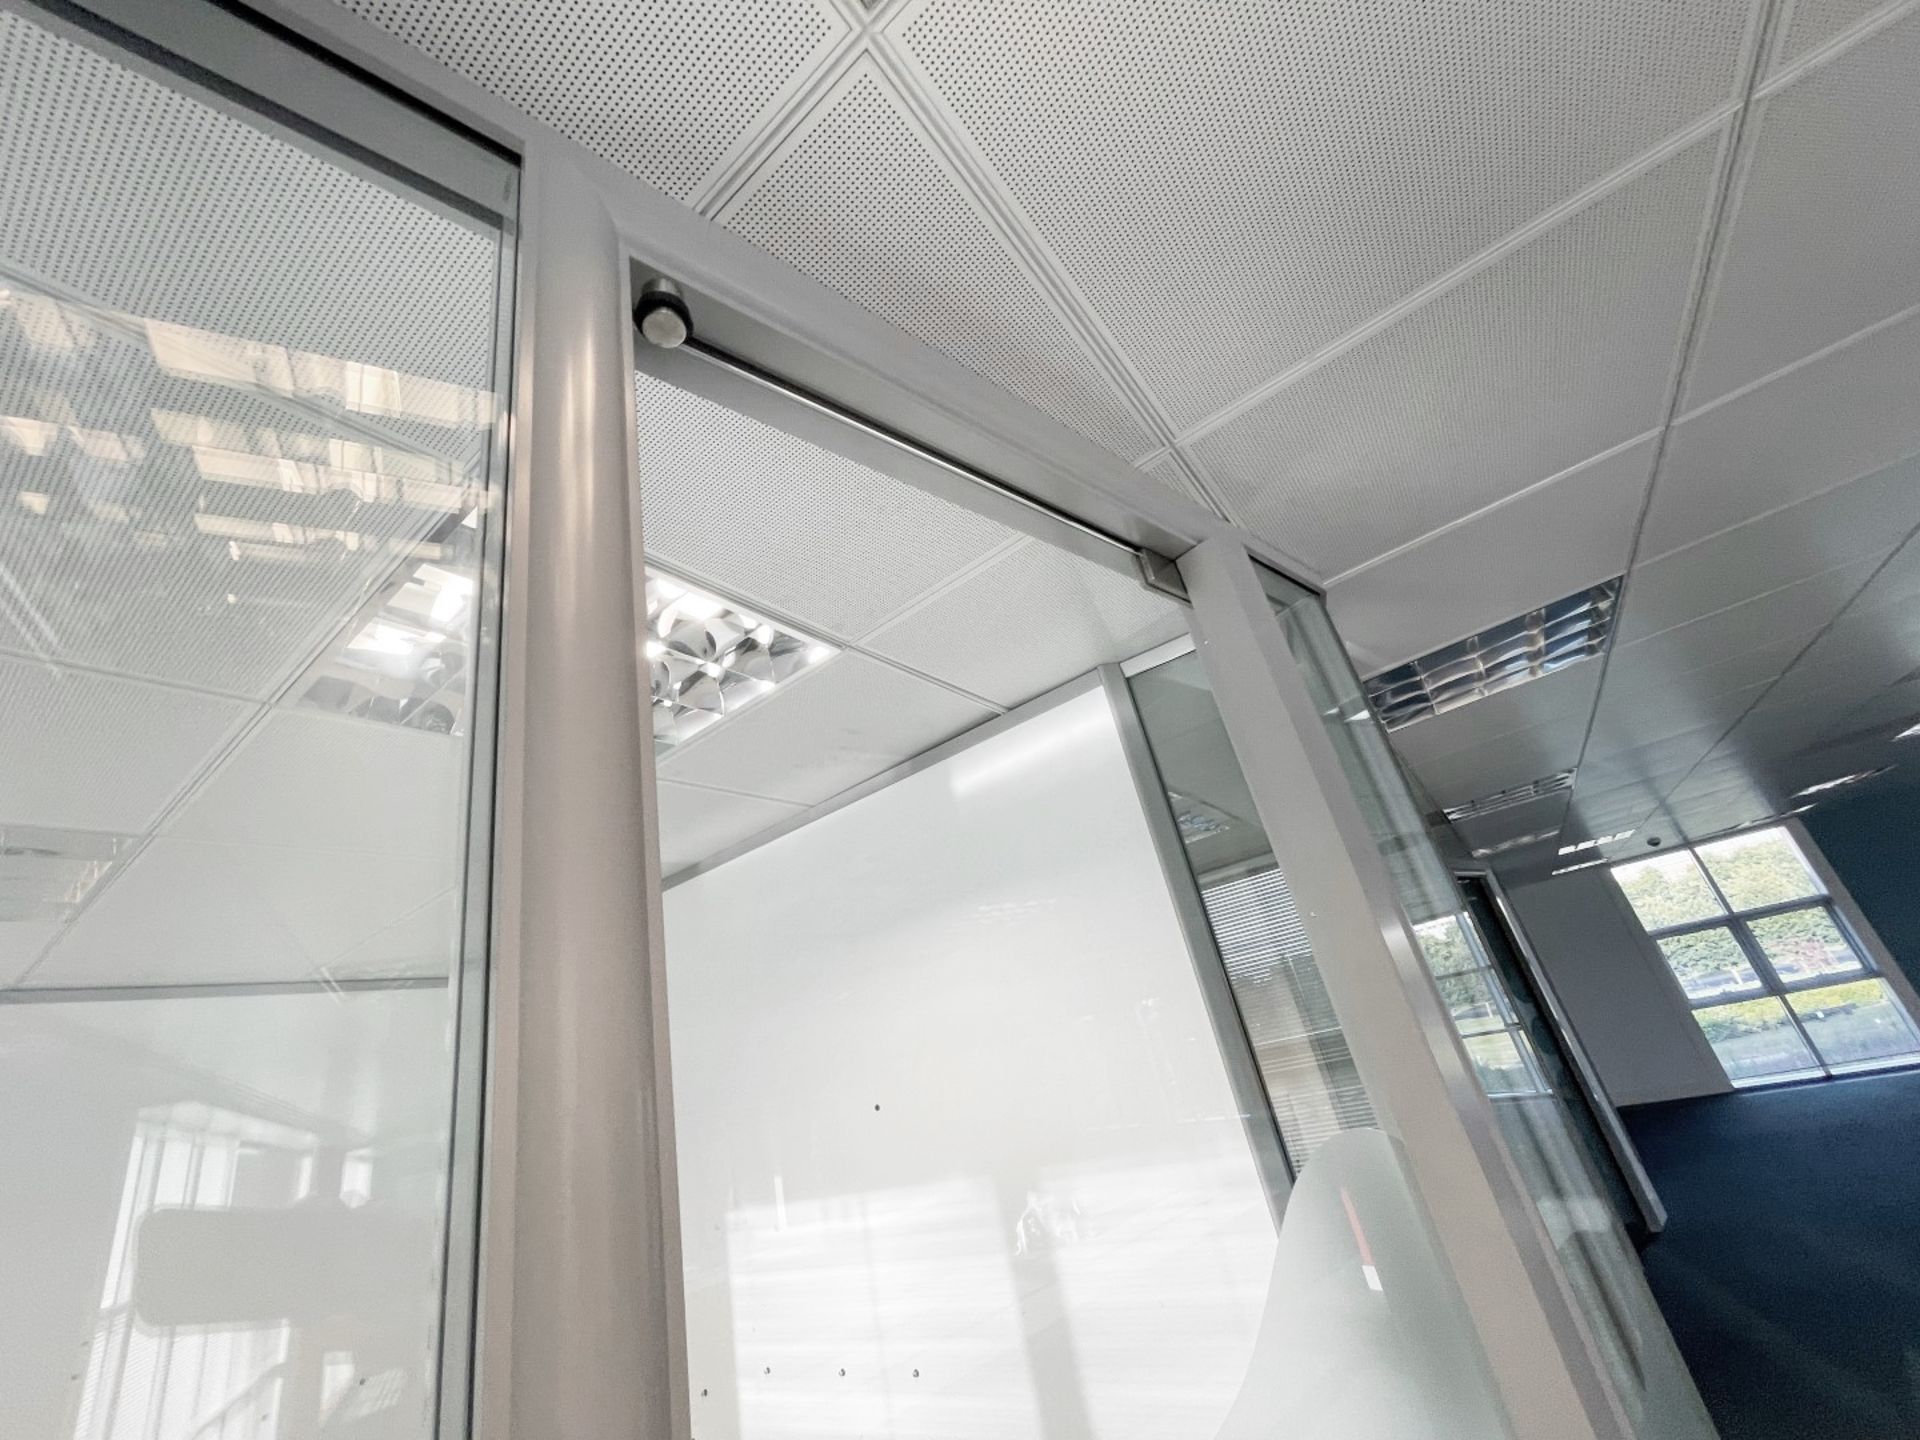 9 x Assorted Glass Office Dividers Panels With 2 x Glass Doors - Currently Covering 2 Offices - Image 9 of 11